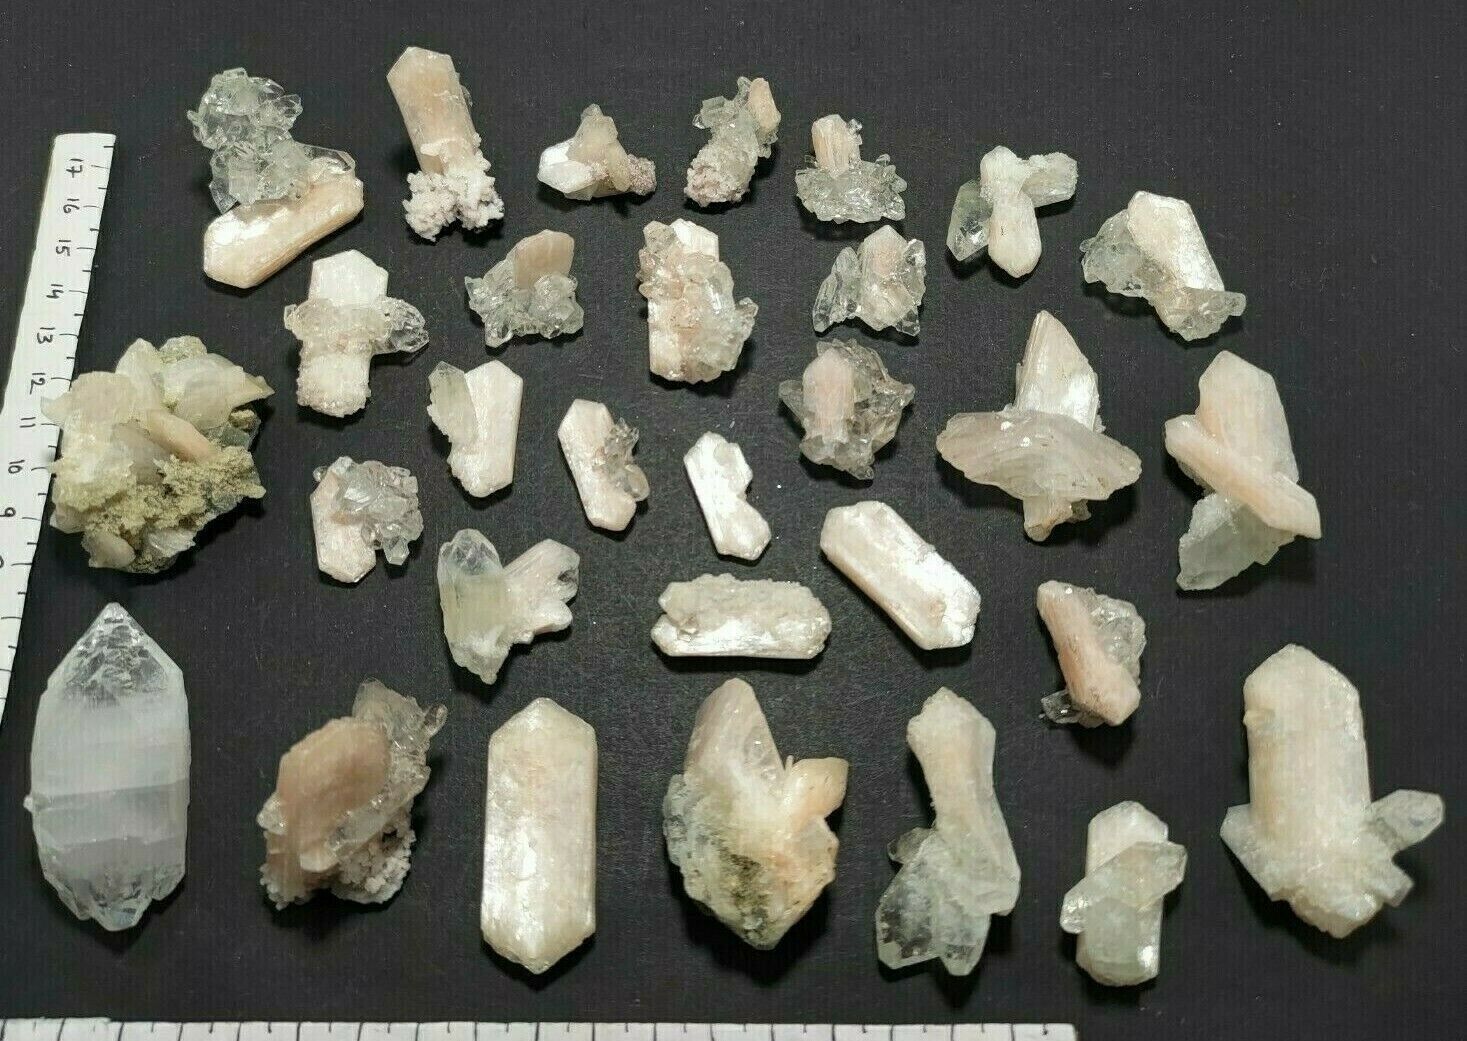 top point apophyllite cluster tips with stilbite on chalcedony crystal lot 1318